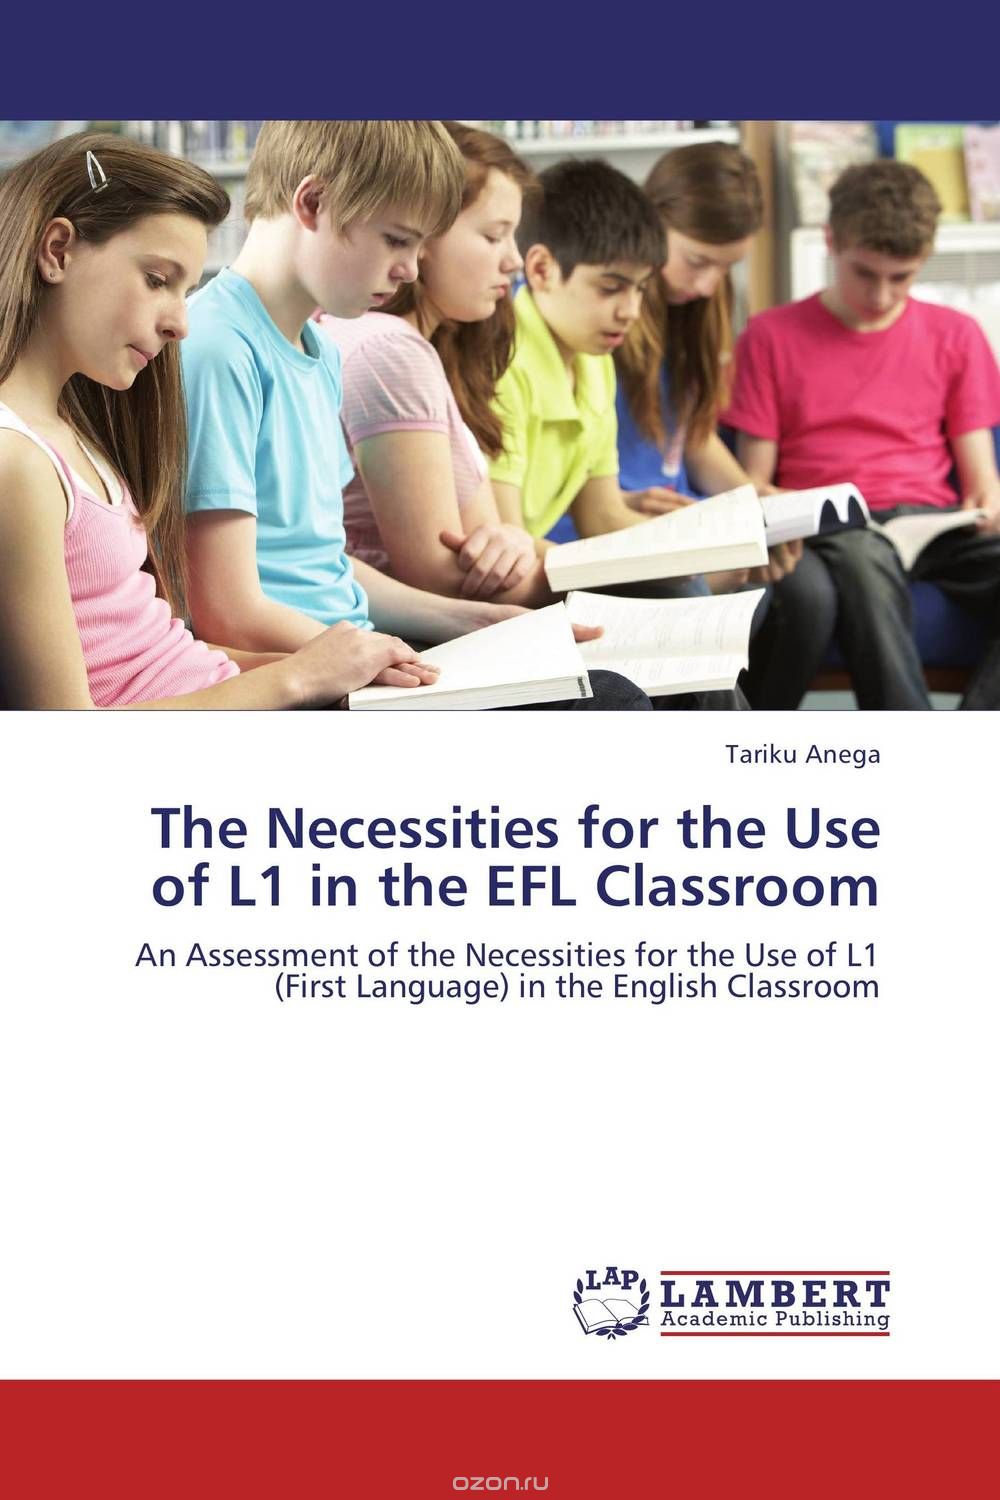 Скачать книгу "The Necessities for the Use of L1 in the EFL Classroom"